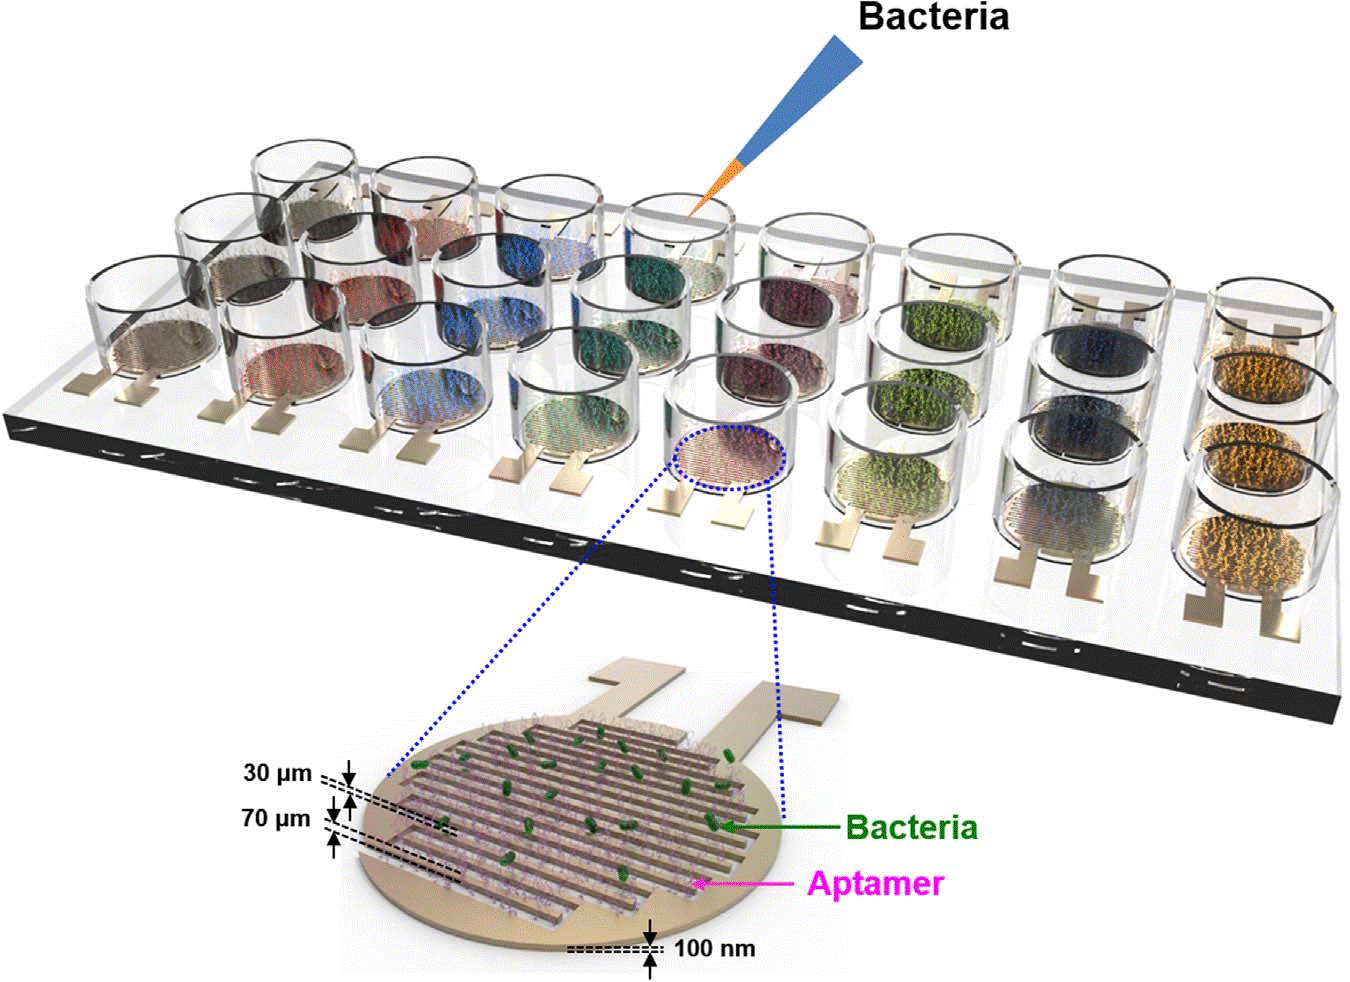 Aptamer-functionalized capacitance sensor array. Aptamers are immobilized onto the sensor surface between electrodes, and the binding of bacteria increases the capacitance of the sensor.